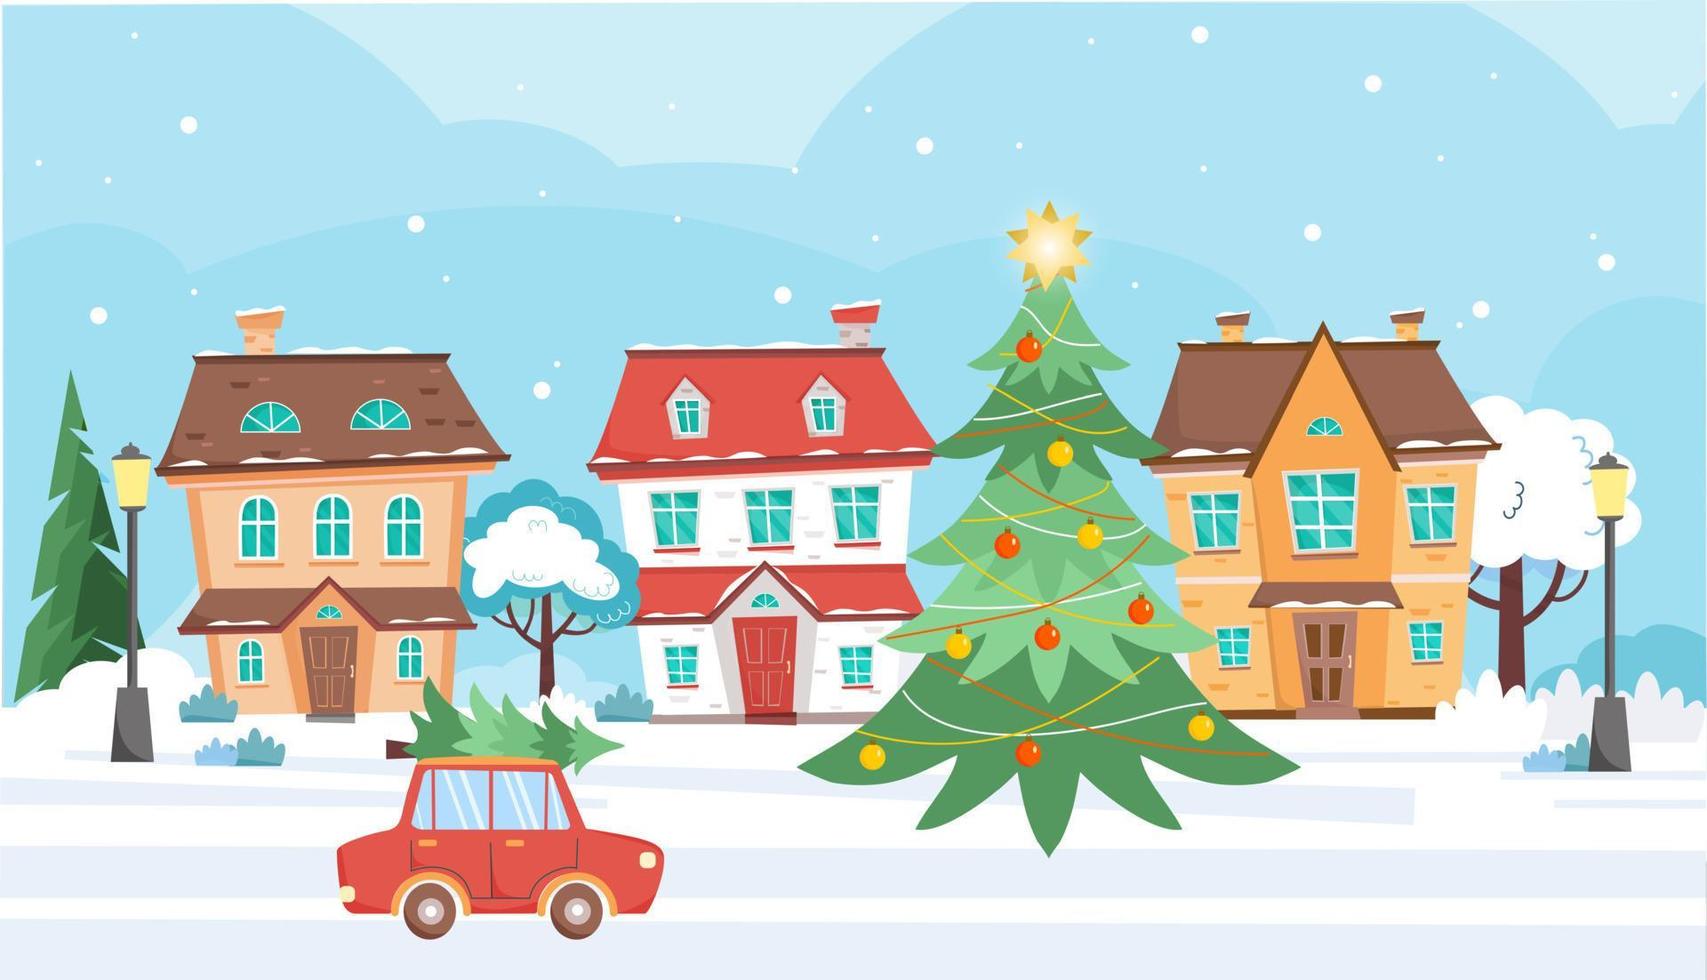 Cute houses at winter snow day. Car is carring fir tree. Cottages, trees, street lamps, christmas tree, cars. Winter town at day time. Vector illustration.